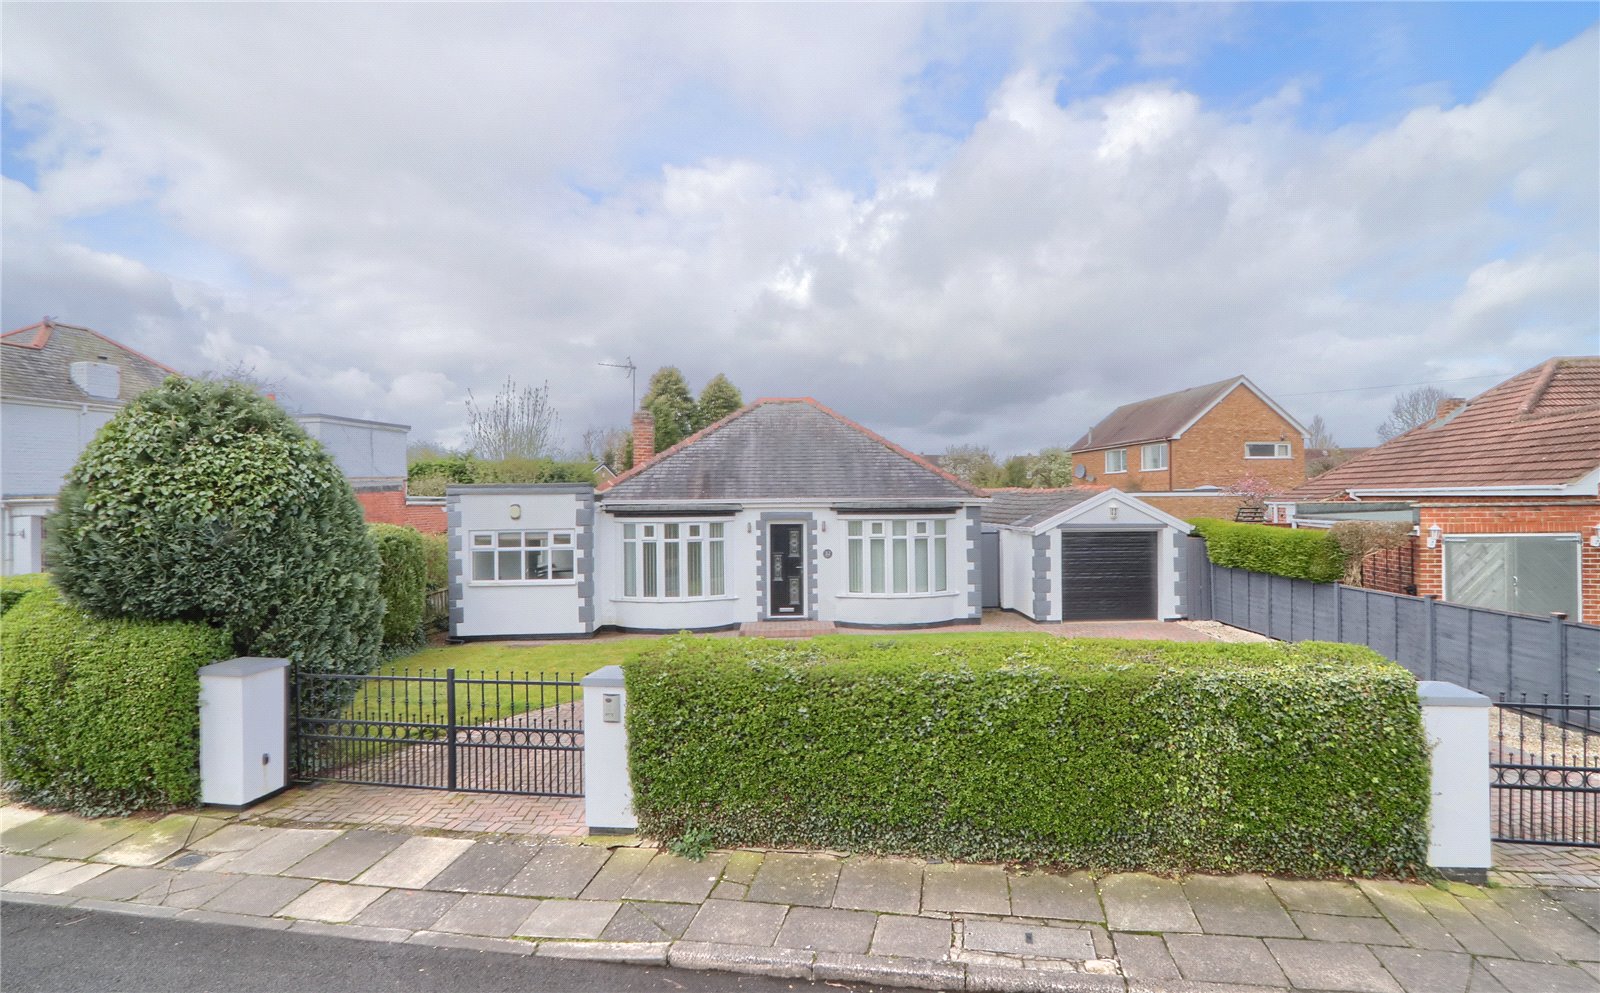 4 bed bungalow for sale in The Avenue, Fairfield  - Property Image 1